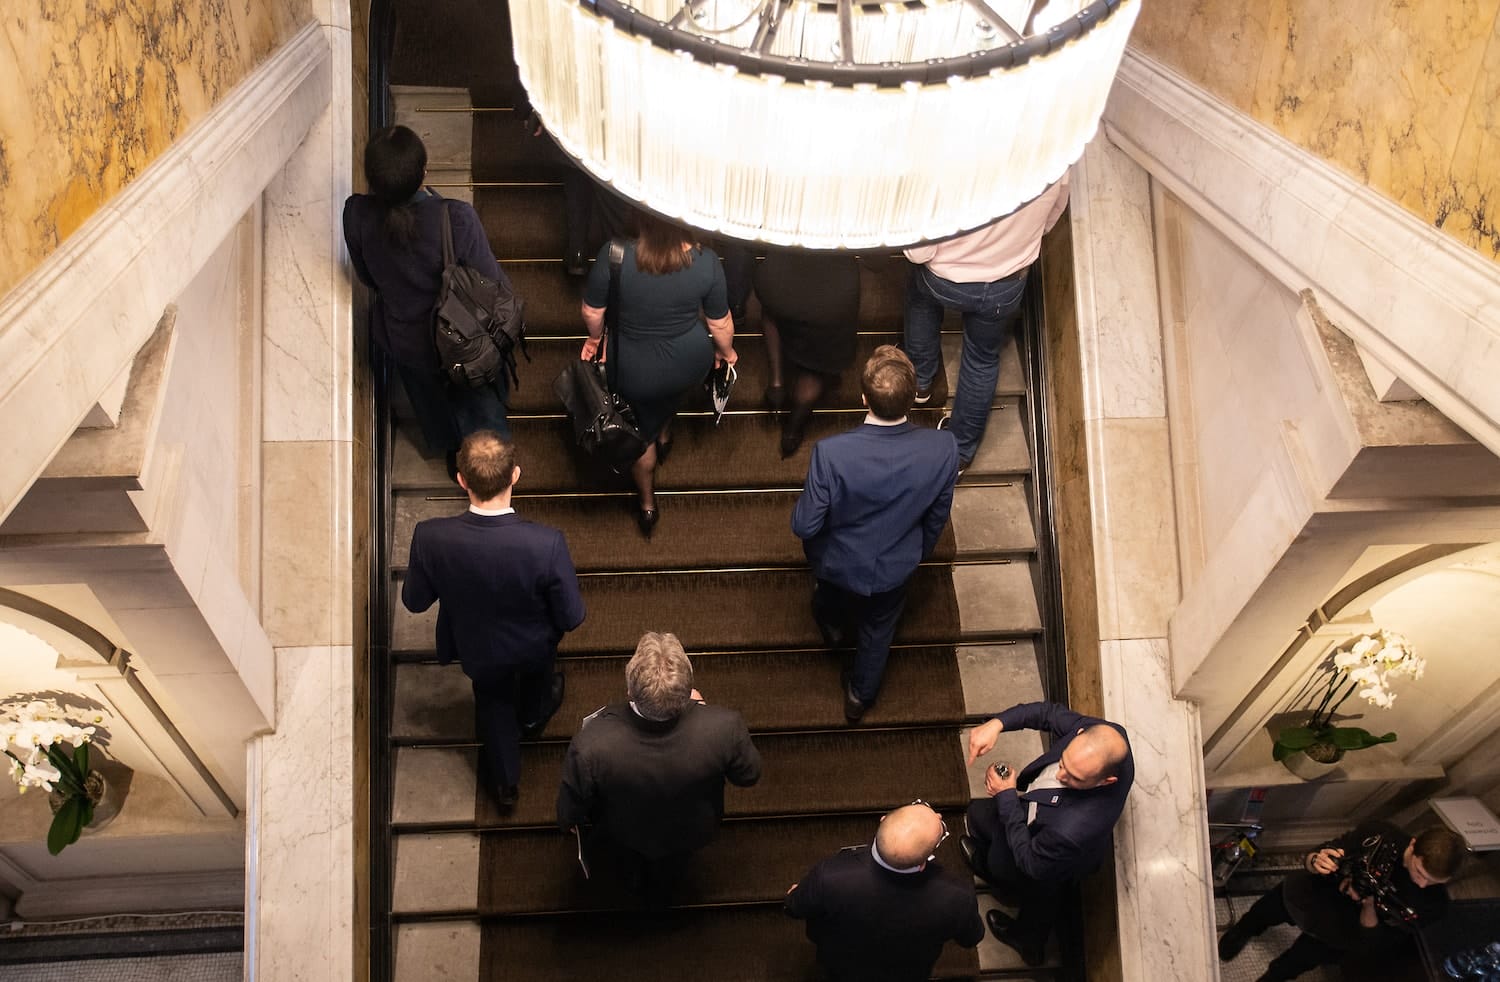 a group of people walking down a flight of stairs.